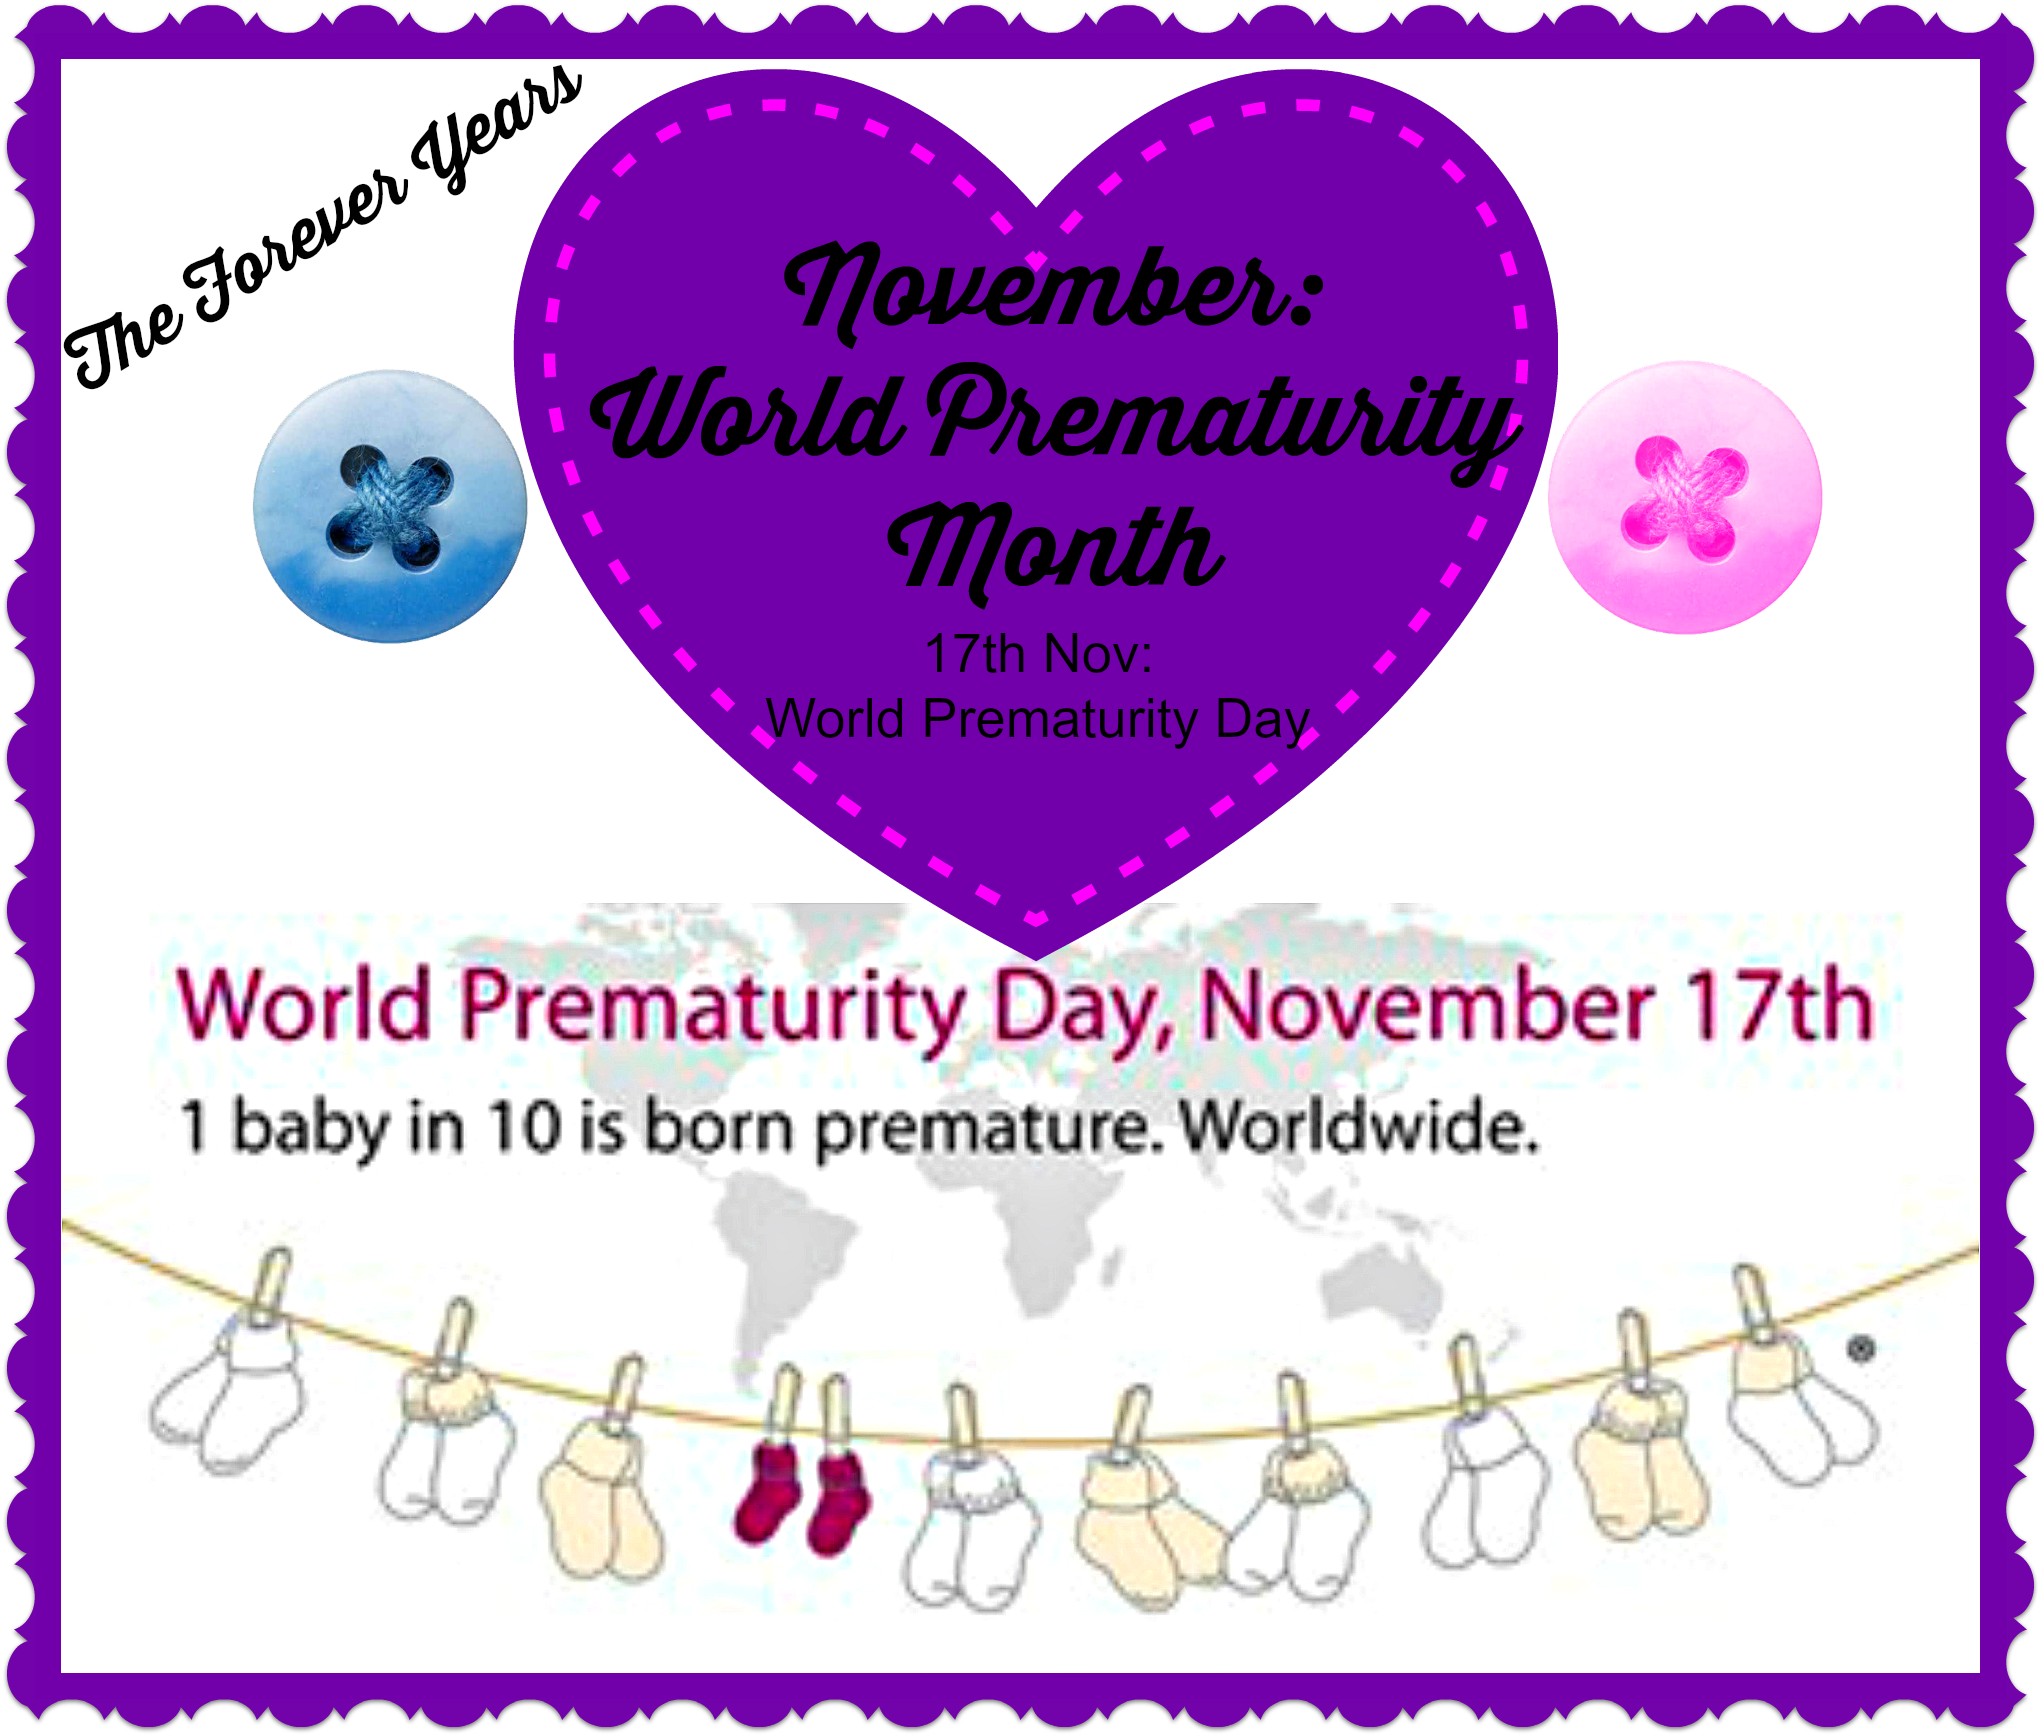 November 17th is World Prematurity Day 